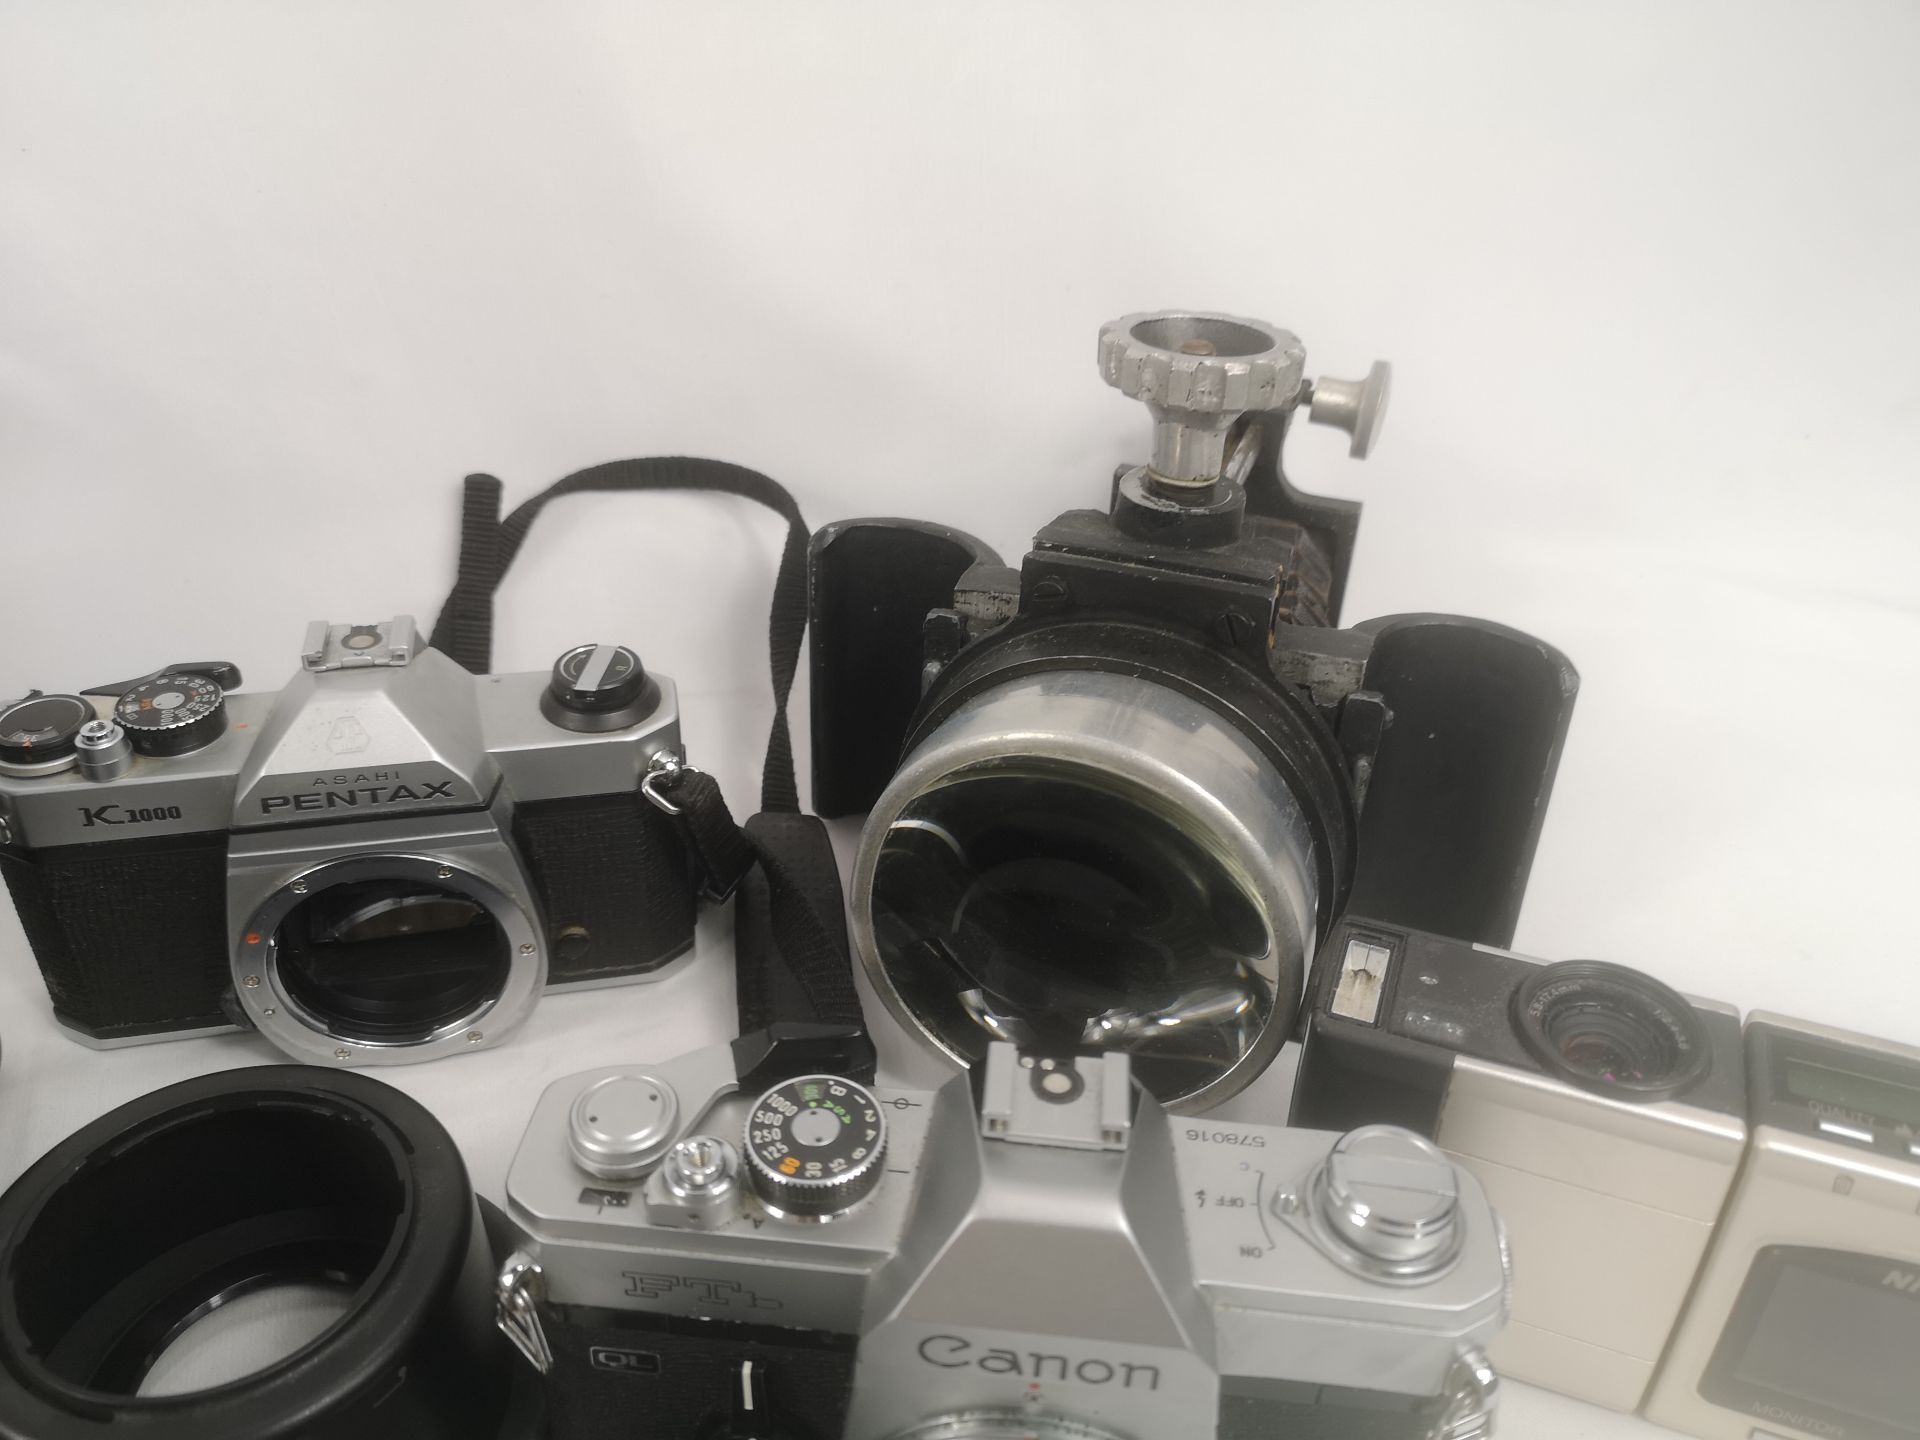 Canon FTB camera body together with various lenses and equipment - Image 5 of 8